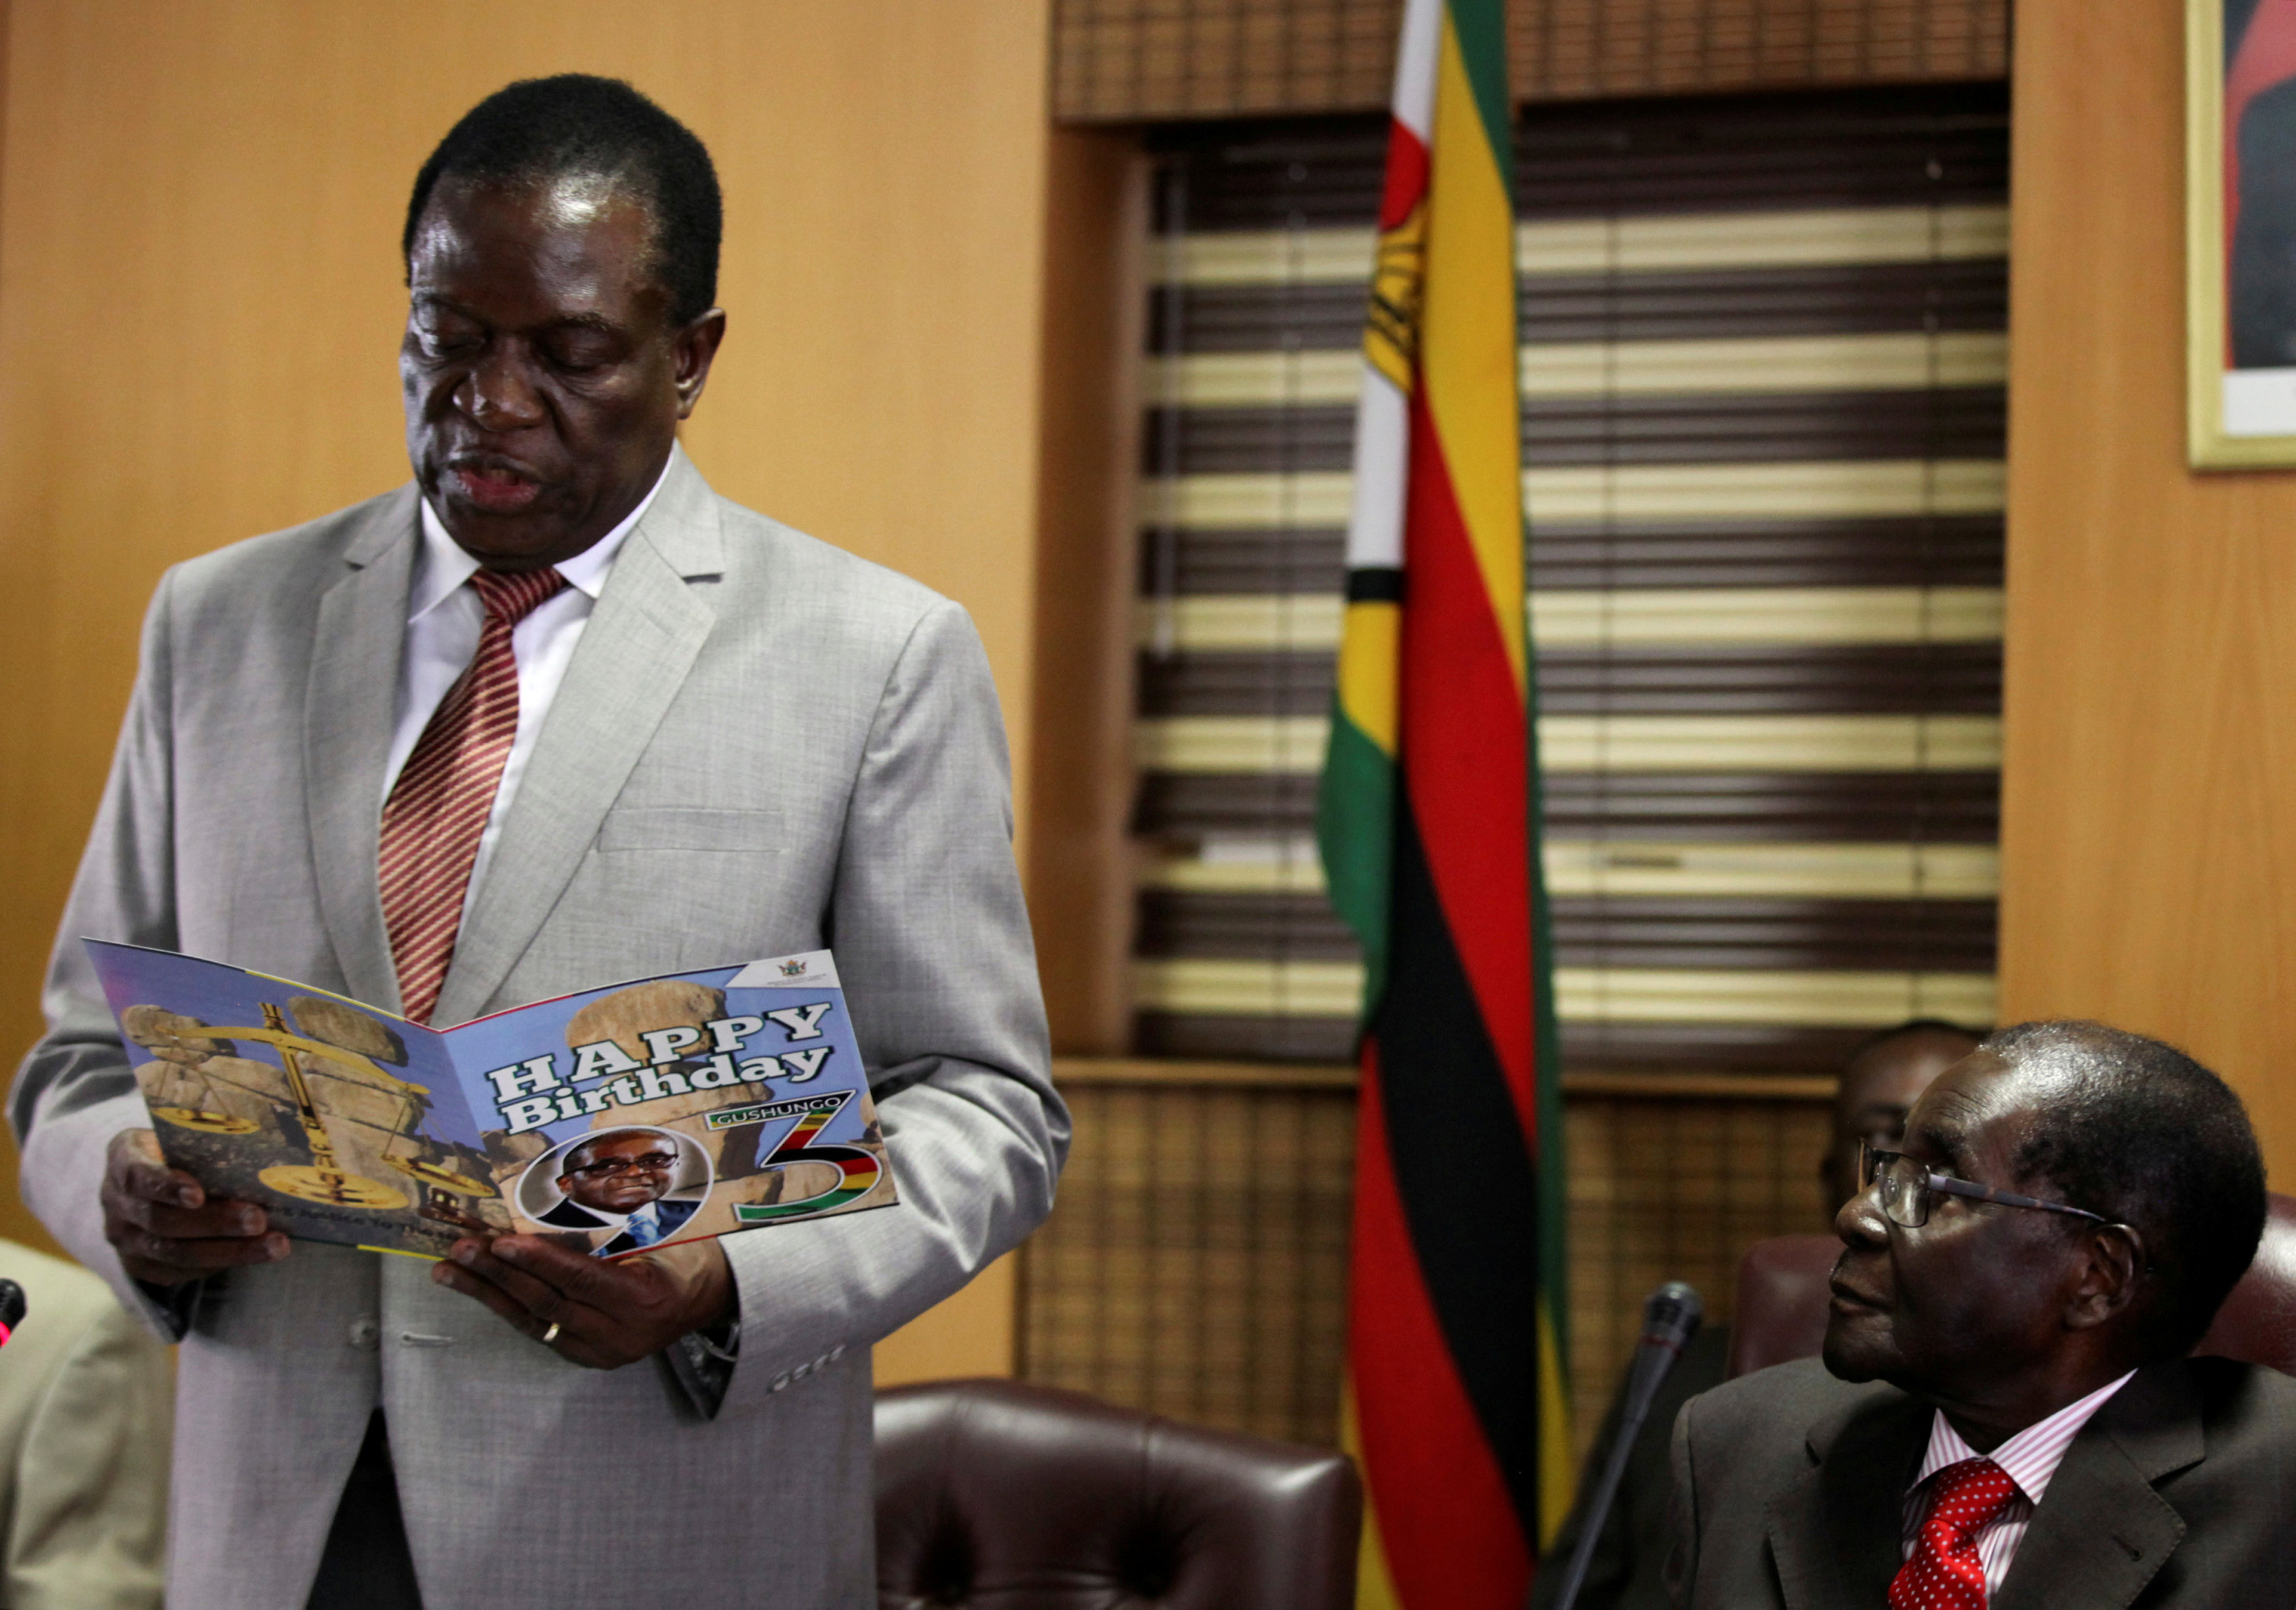 Mnangagwa to be sworn in as president on Friday